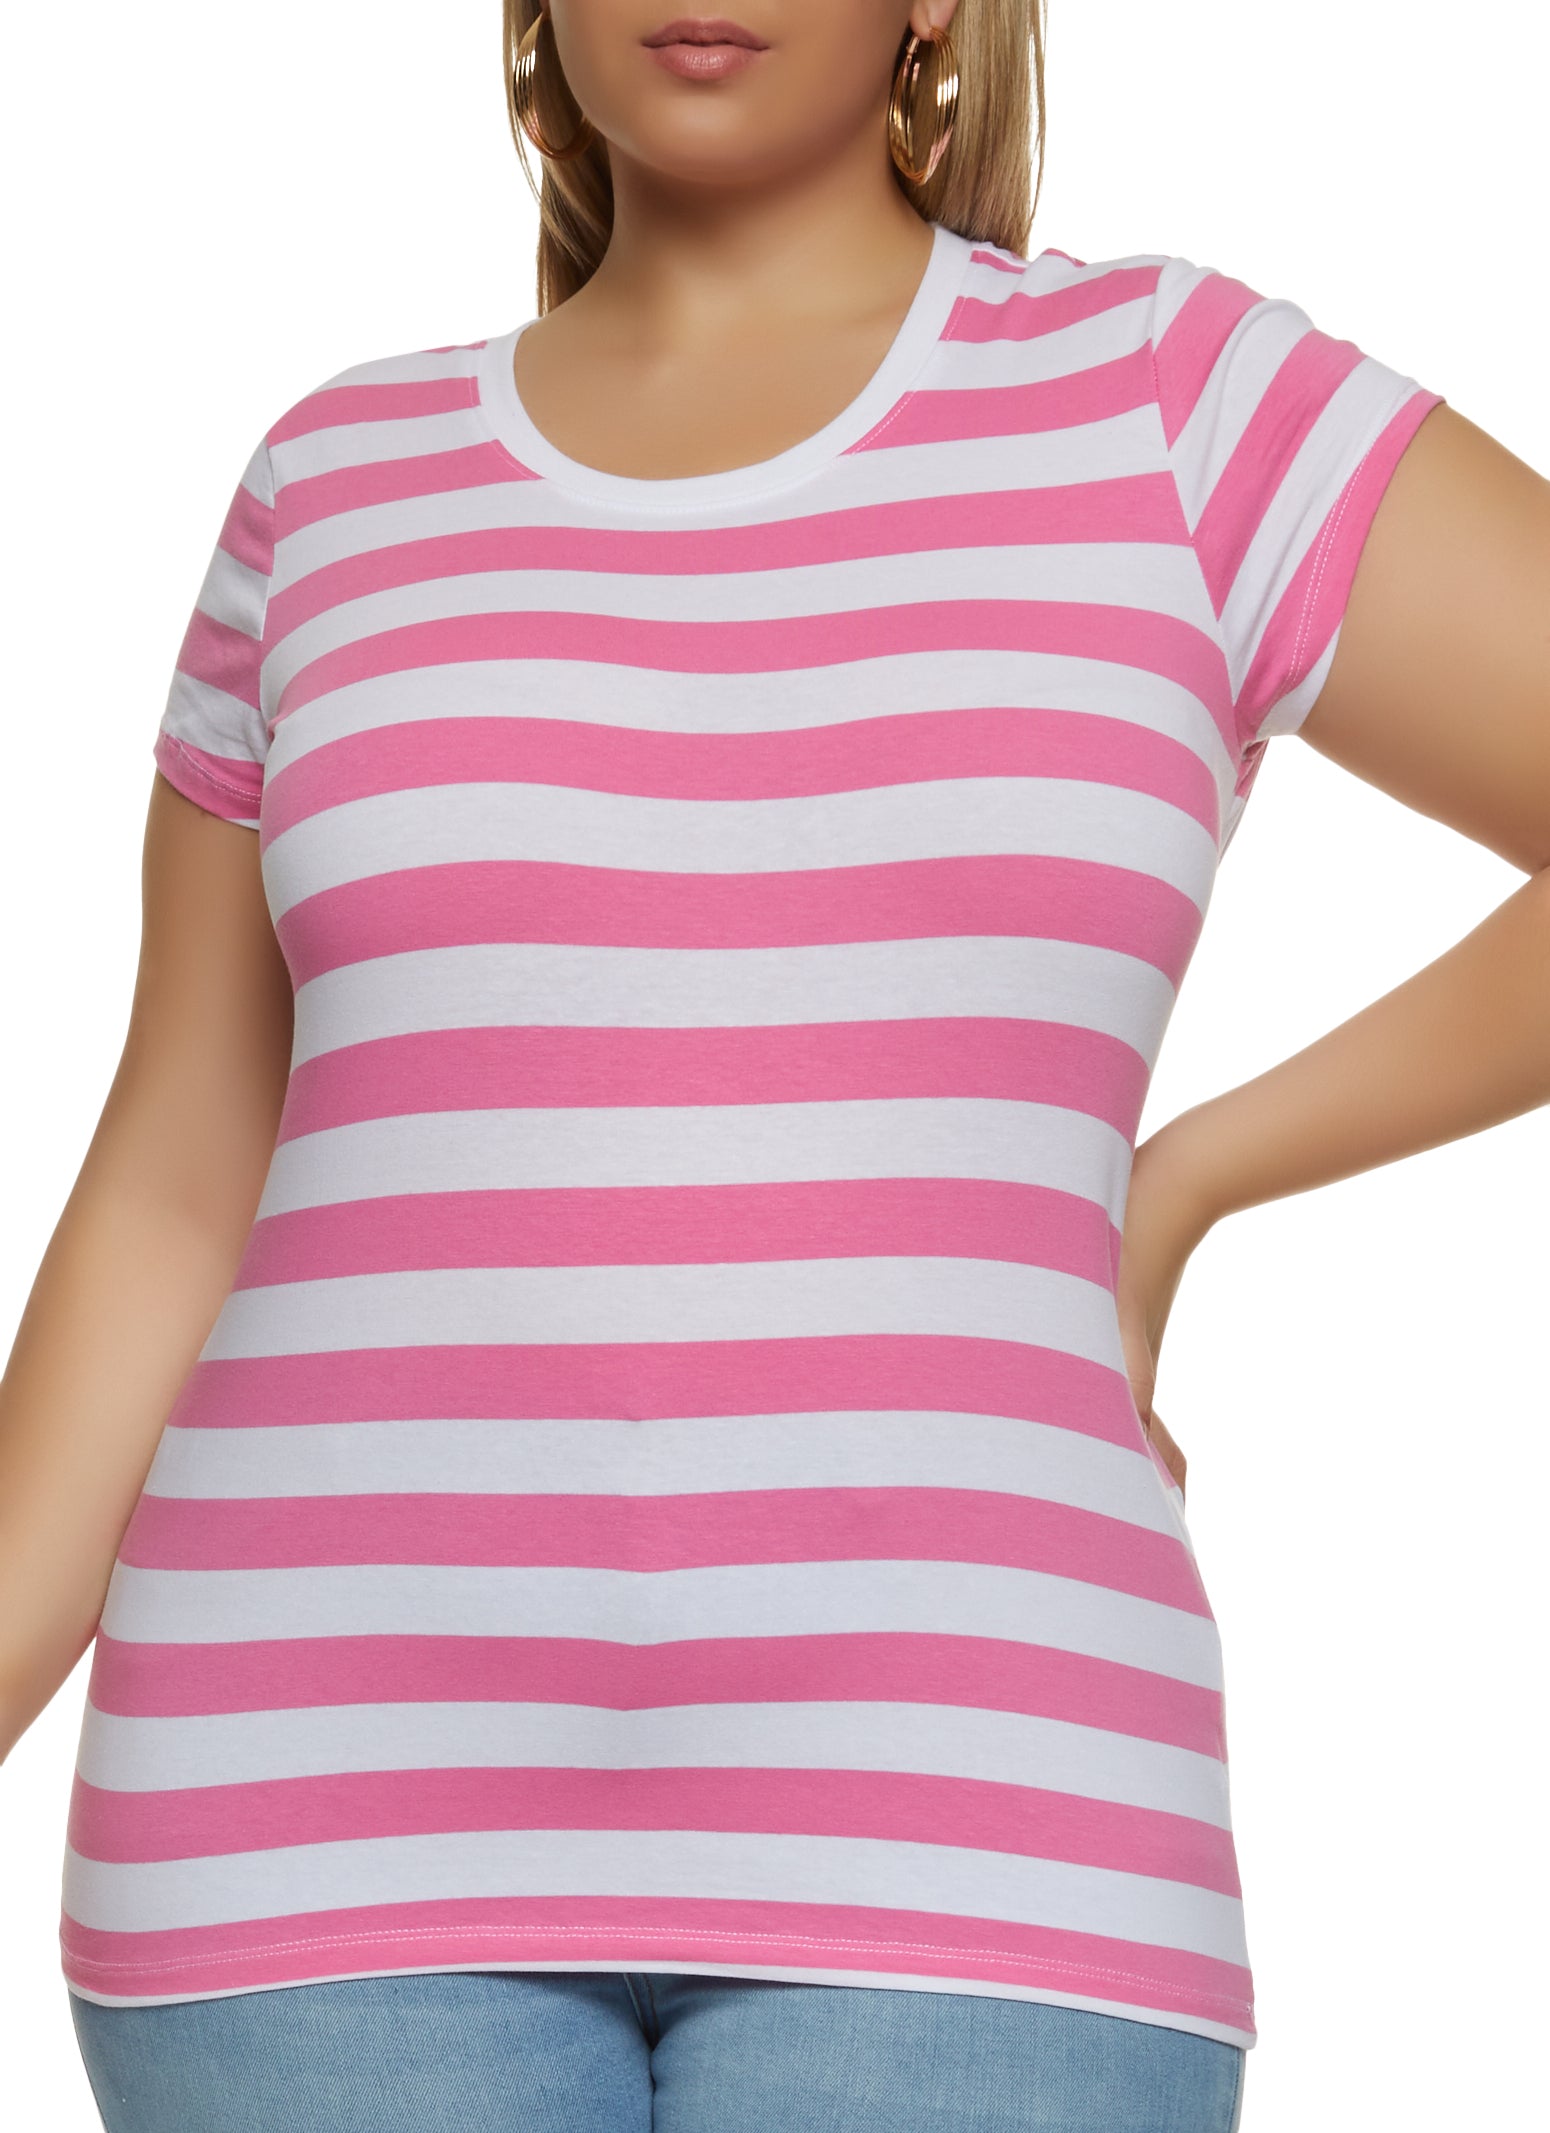 Extra Touch Roused Side Striped Tee Women's Plus size 2X T-Shirt